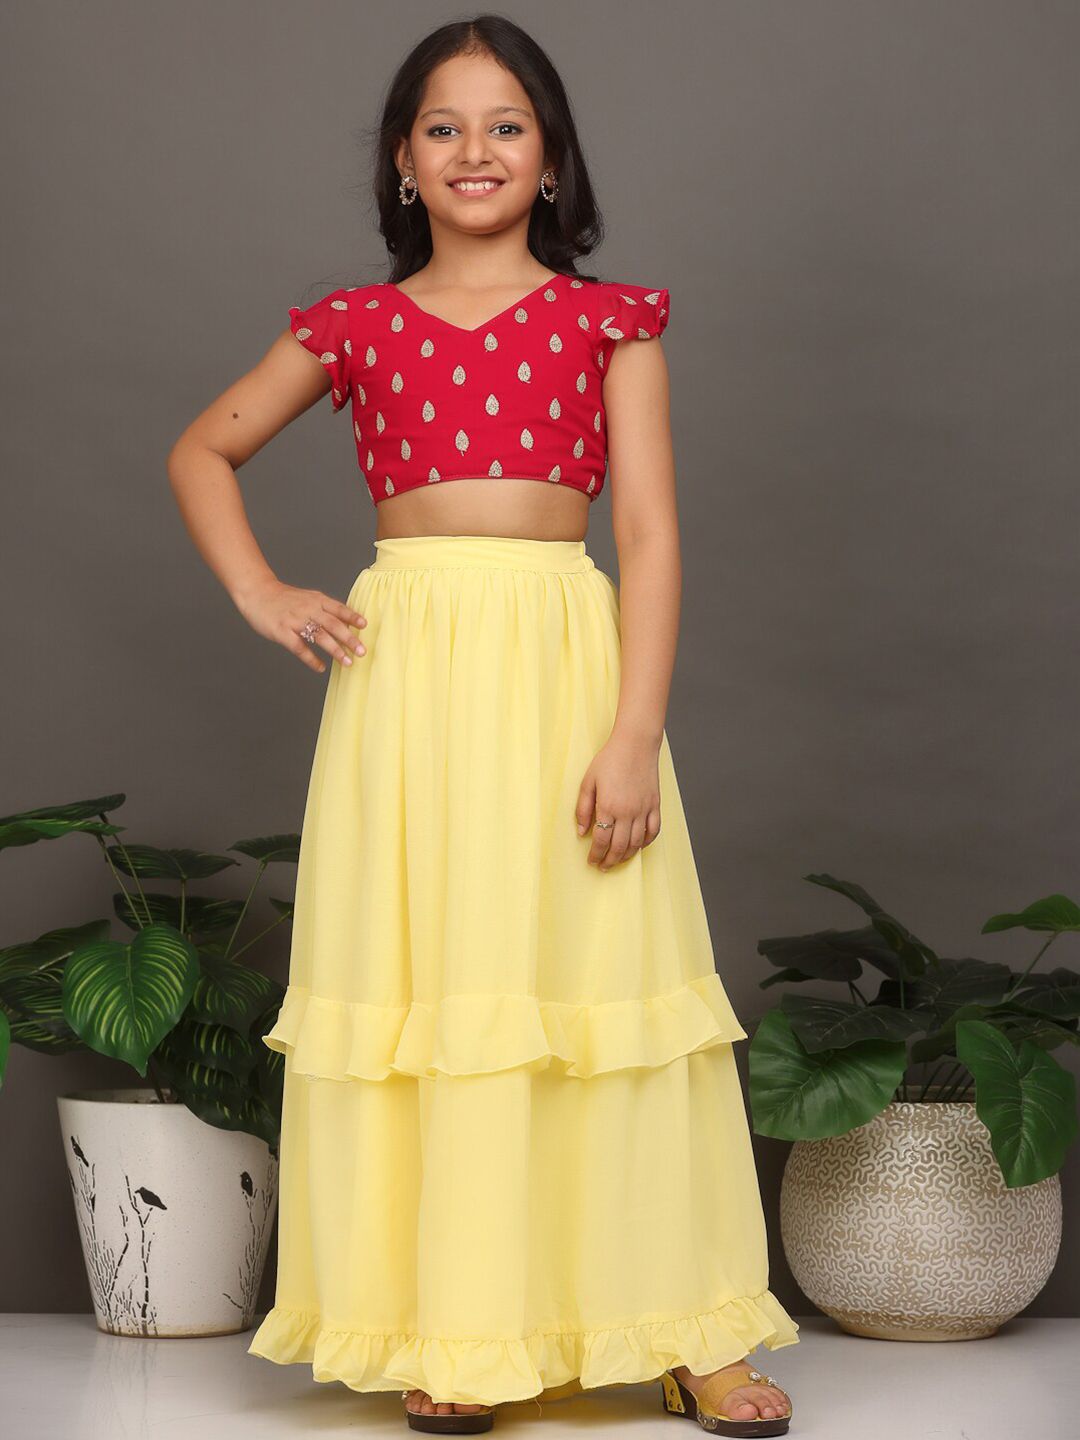 Ethnovog Girls Embroidered Ready to Wear Lehenga & Blouse With Dupatta Price in India